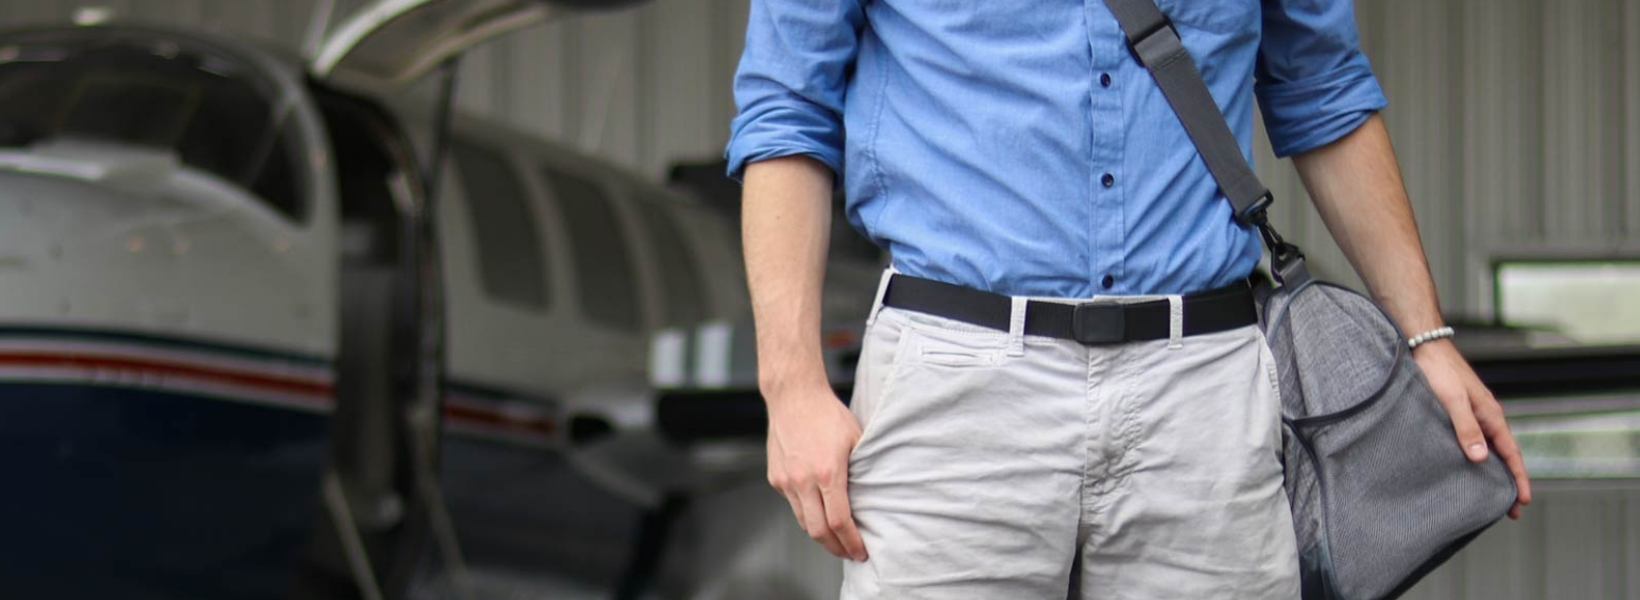 7 Best TSA Approved Belts and Airport Friendly Belts